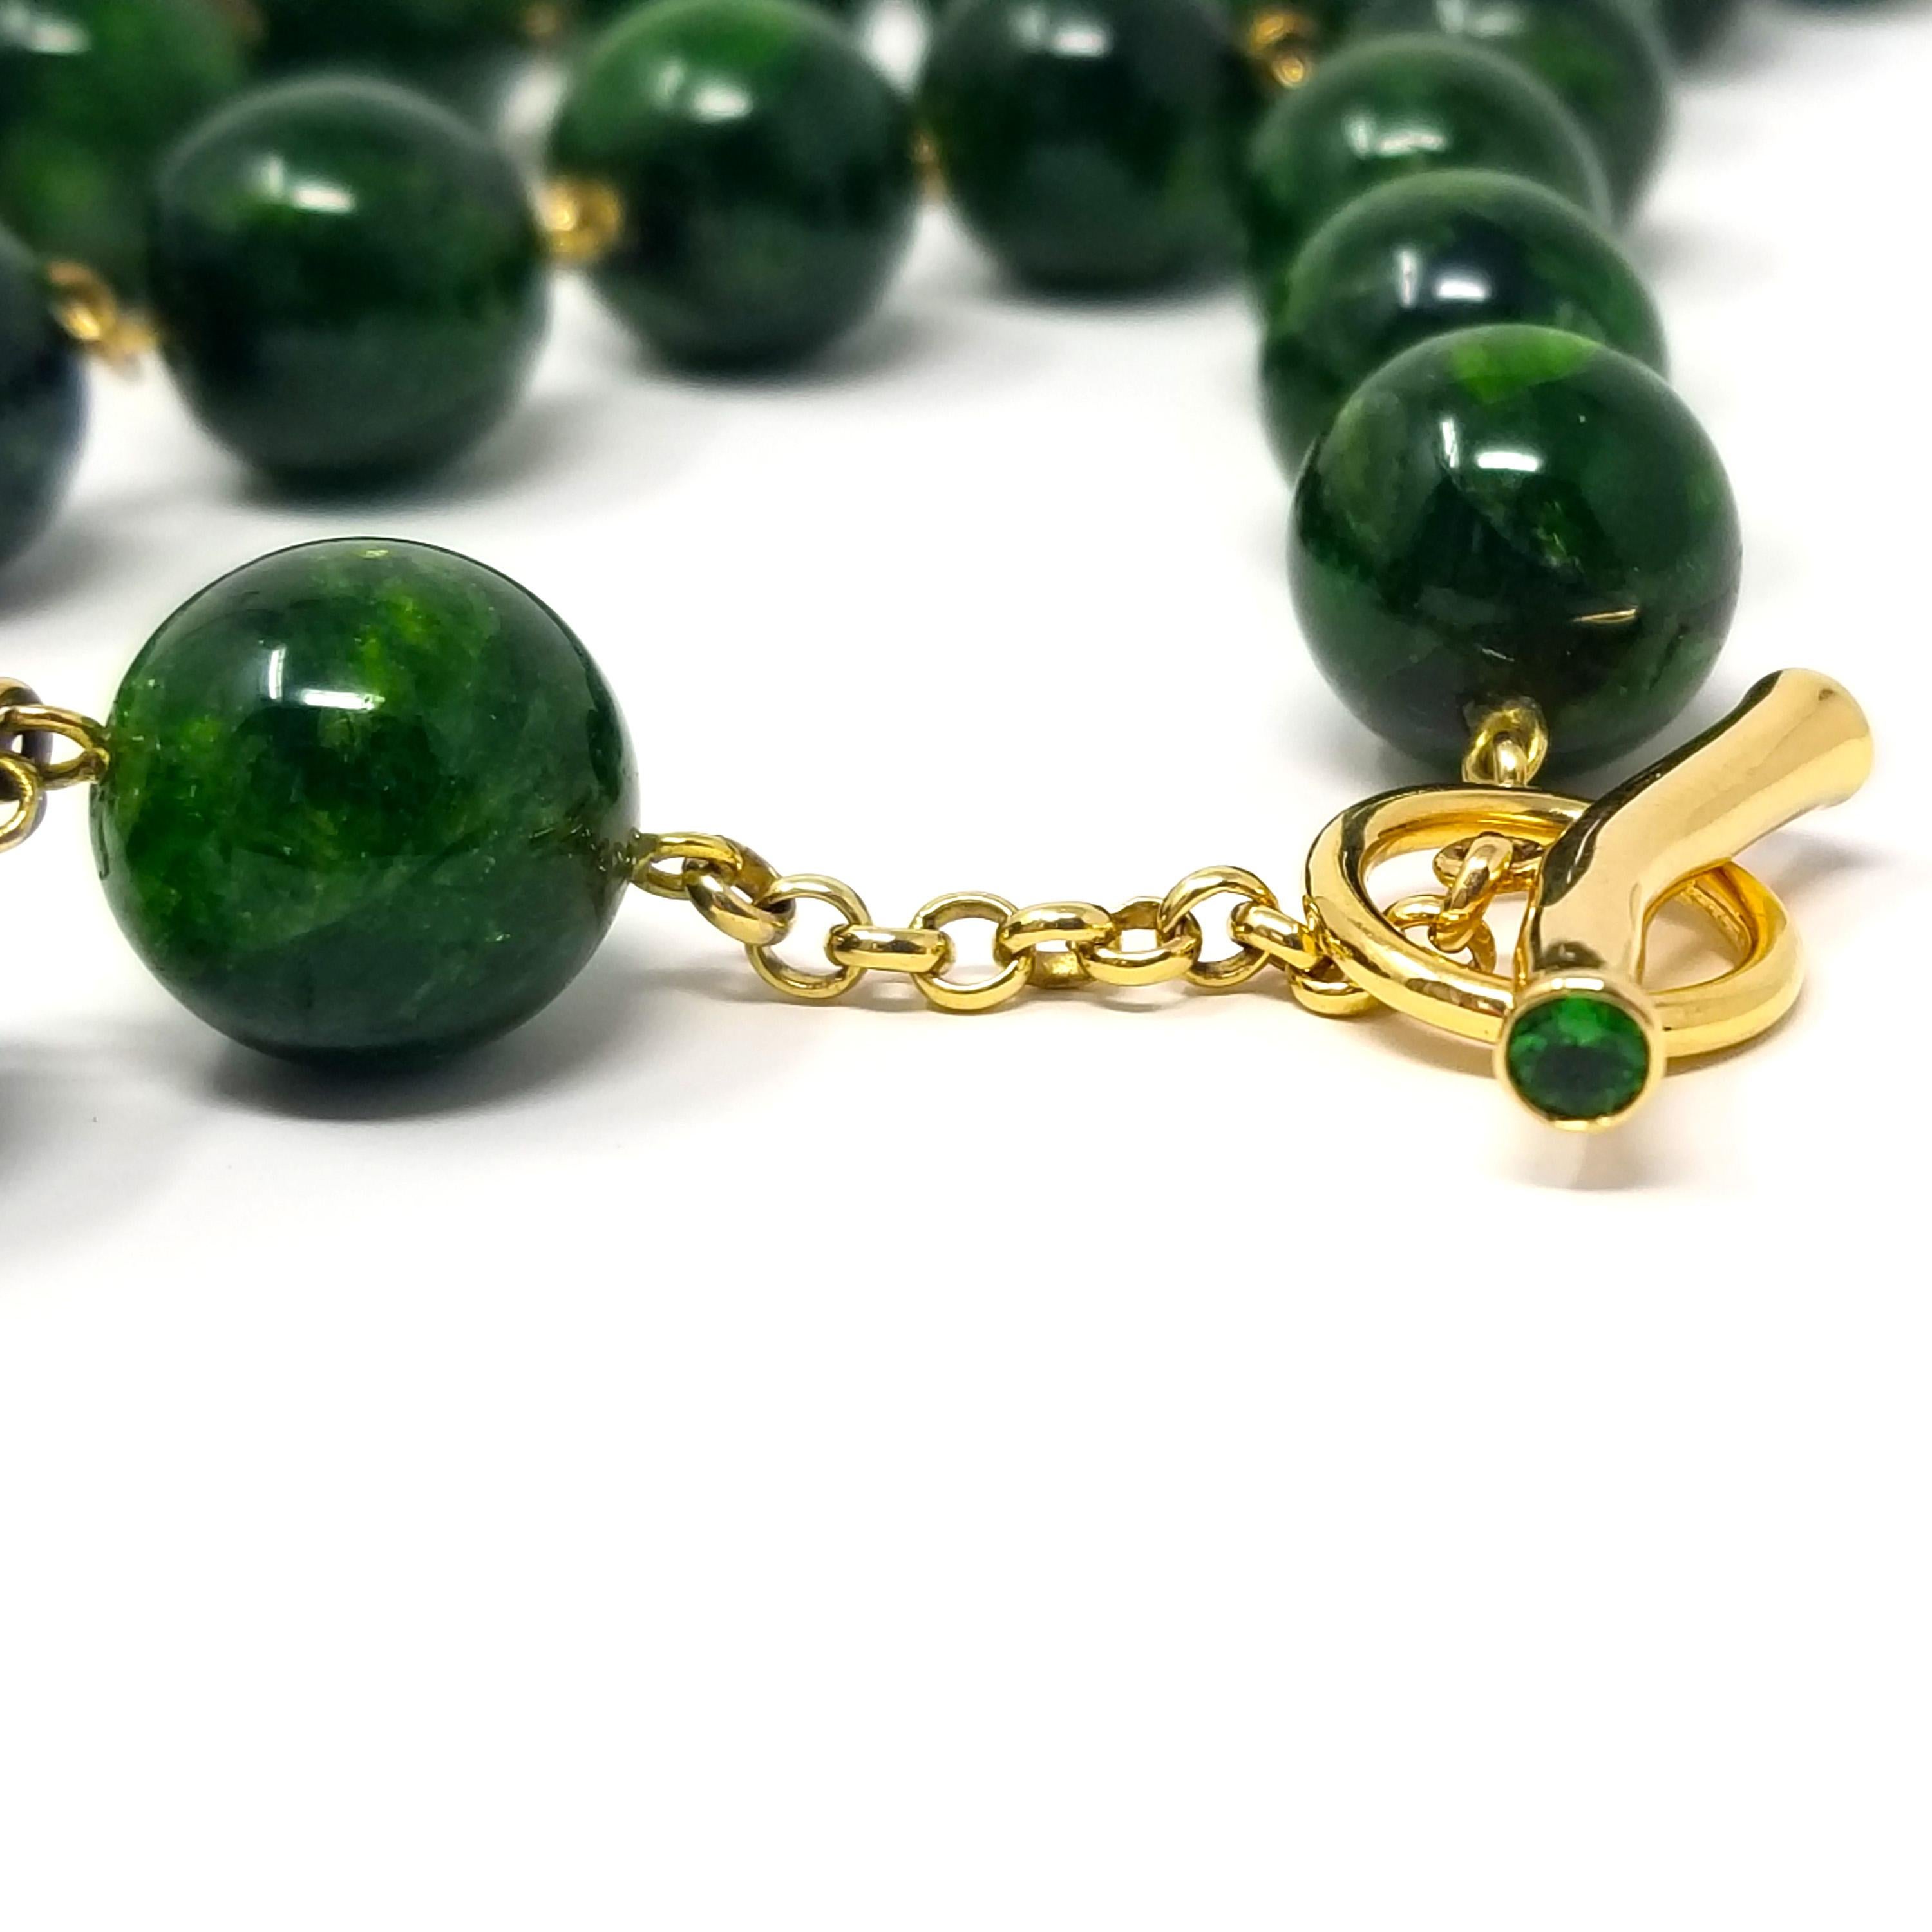 Exceptionally luxurious, these shimmering and verdant chrome diopside beads are utterly unexpected. These richly colored gemstone beads are an exquisitely vivid green color, and each bead features a mix of opaque and transparent material. There are